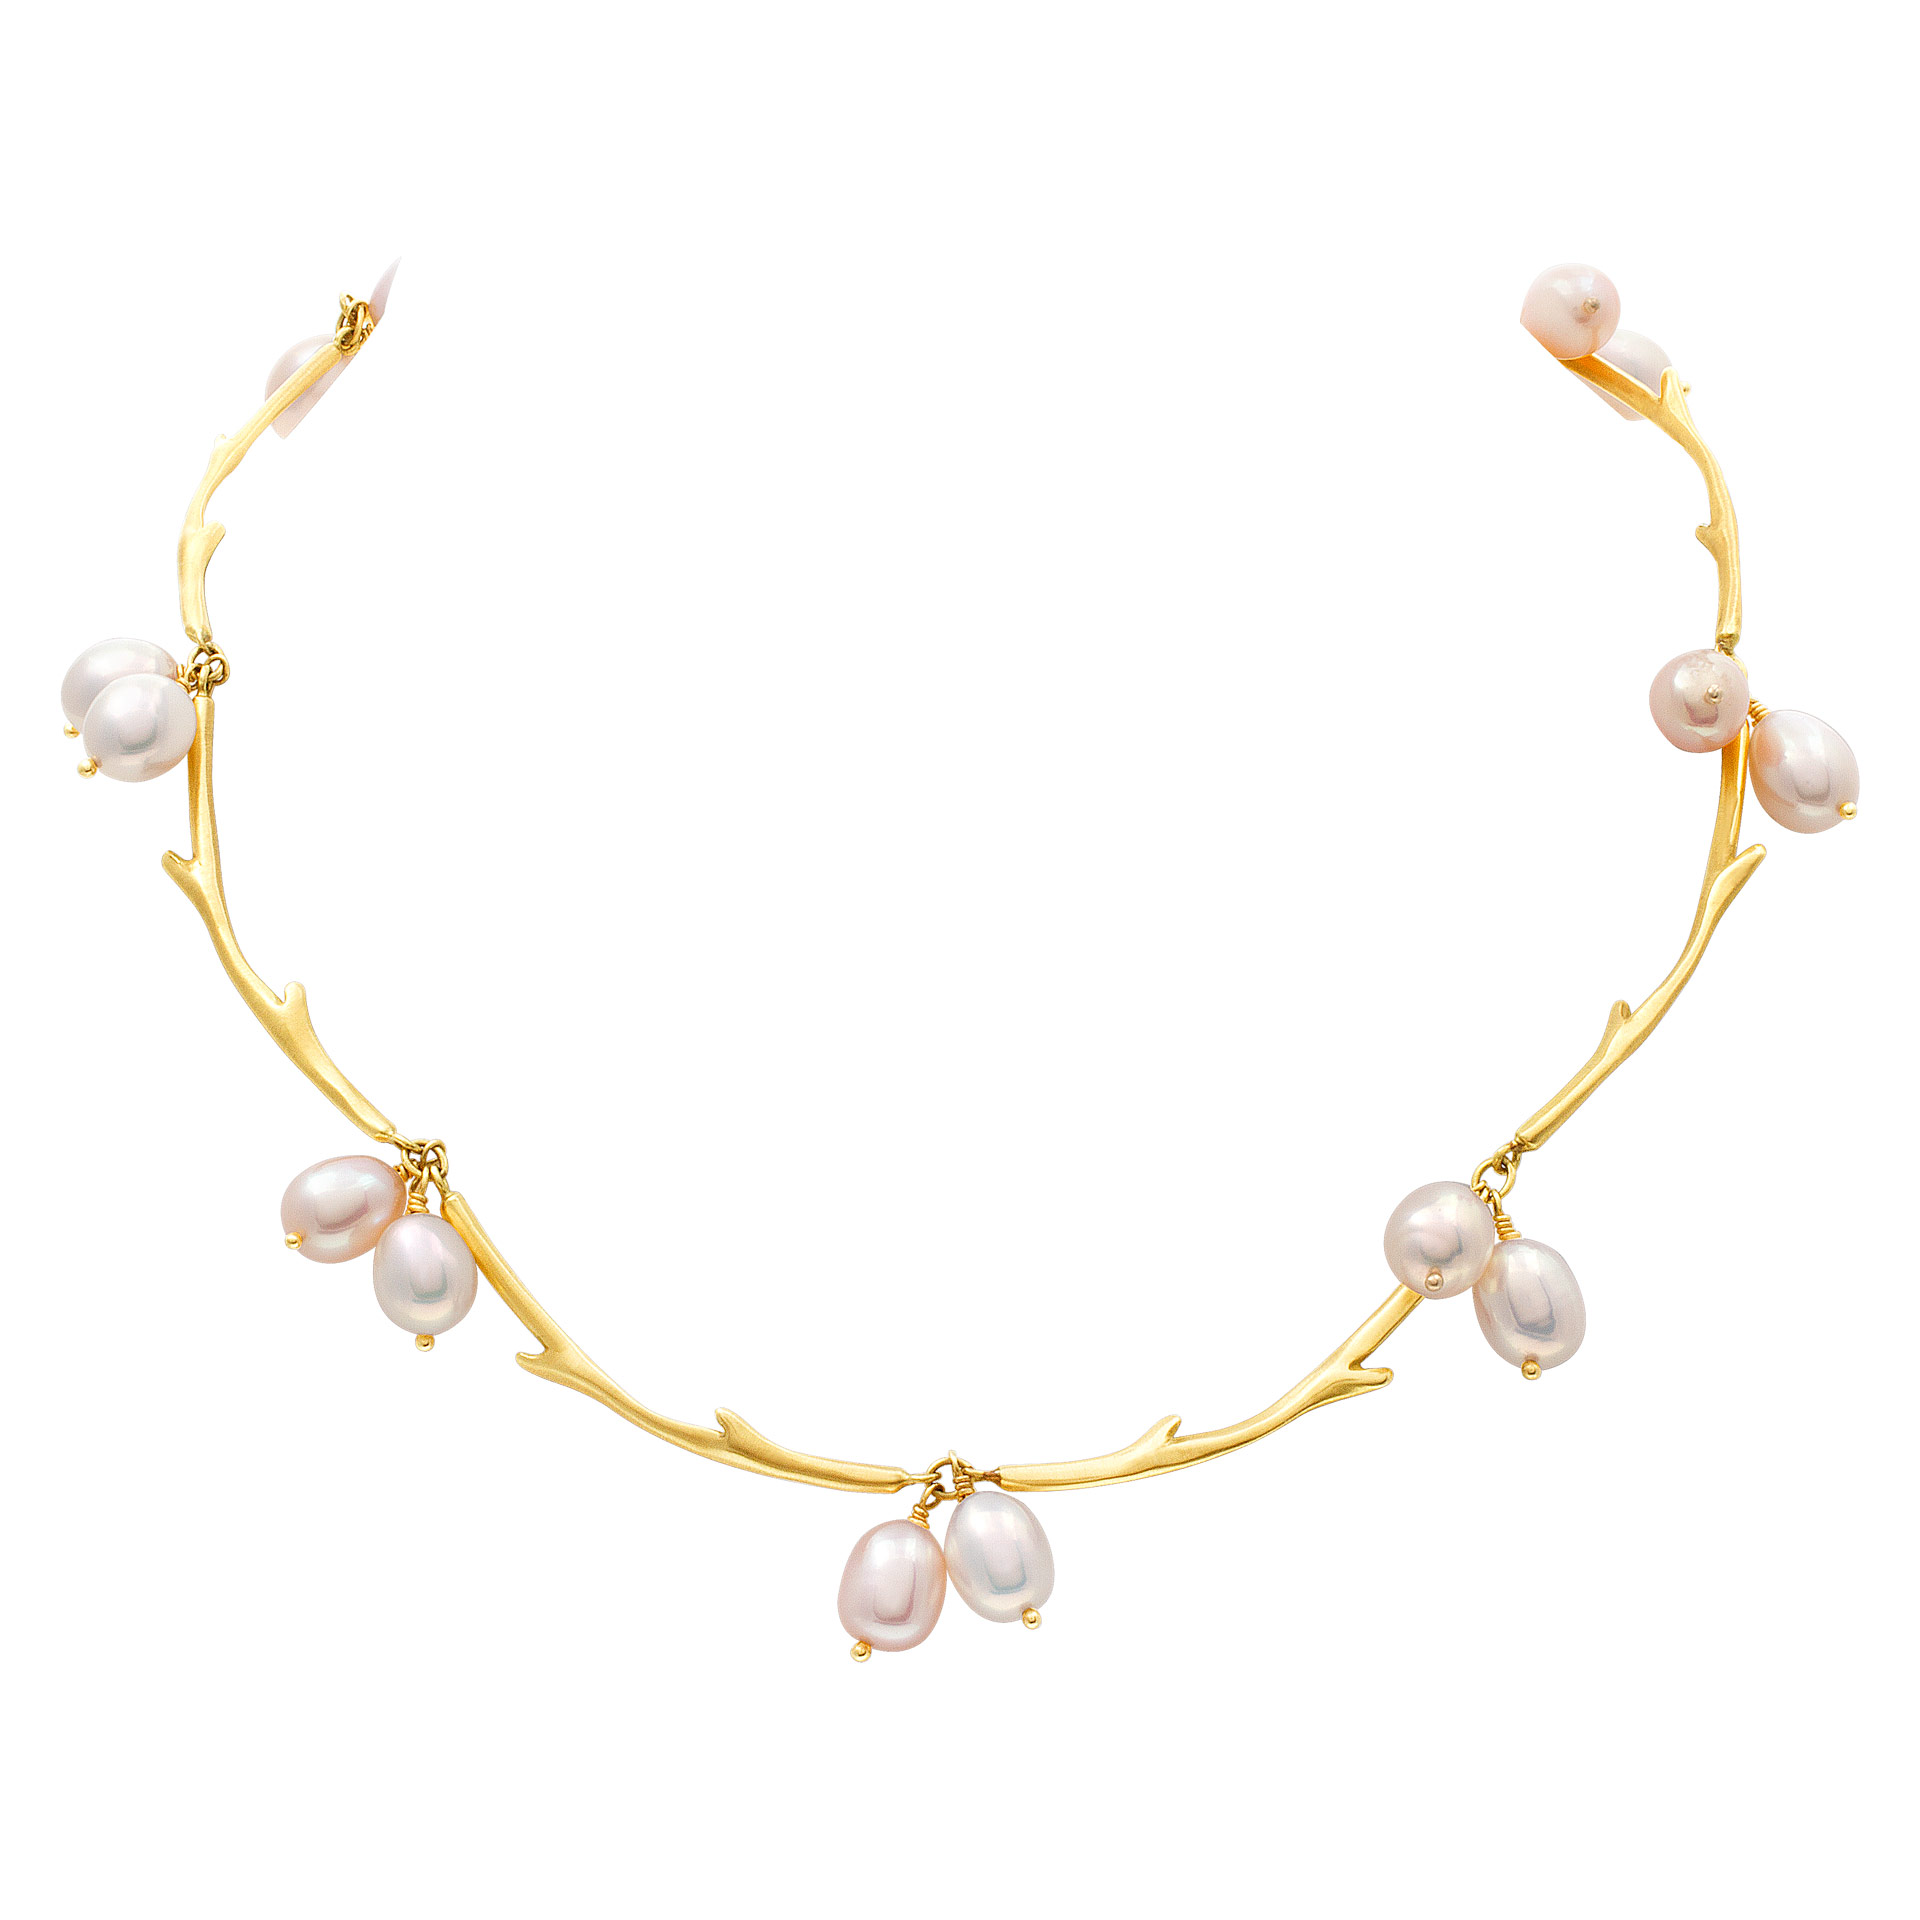 Oval fresh water pearls necklace in 18k gold. 9.5 x 10mm pearls. 15 inches. image 1